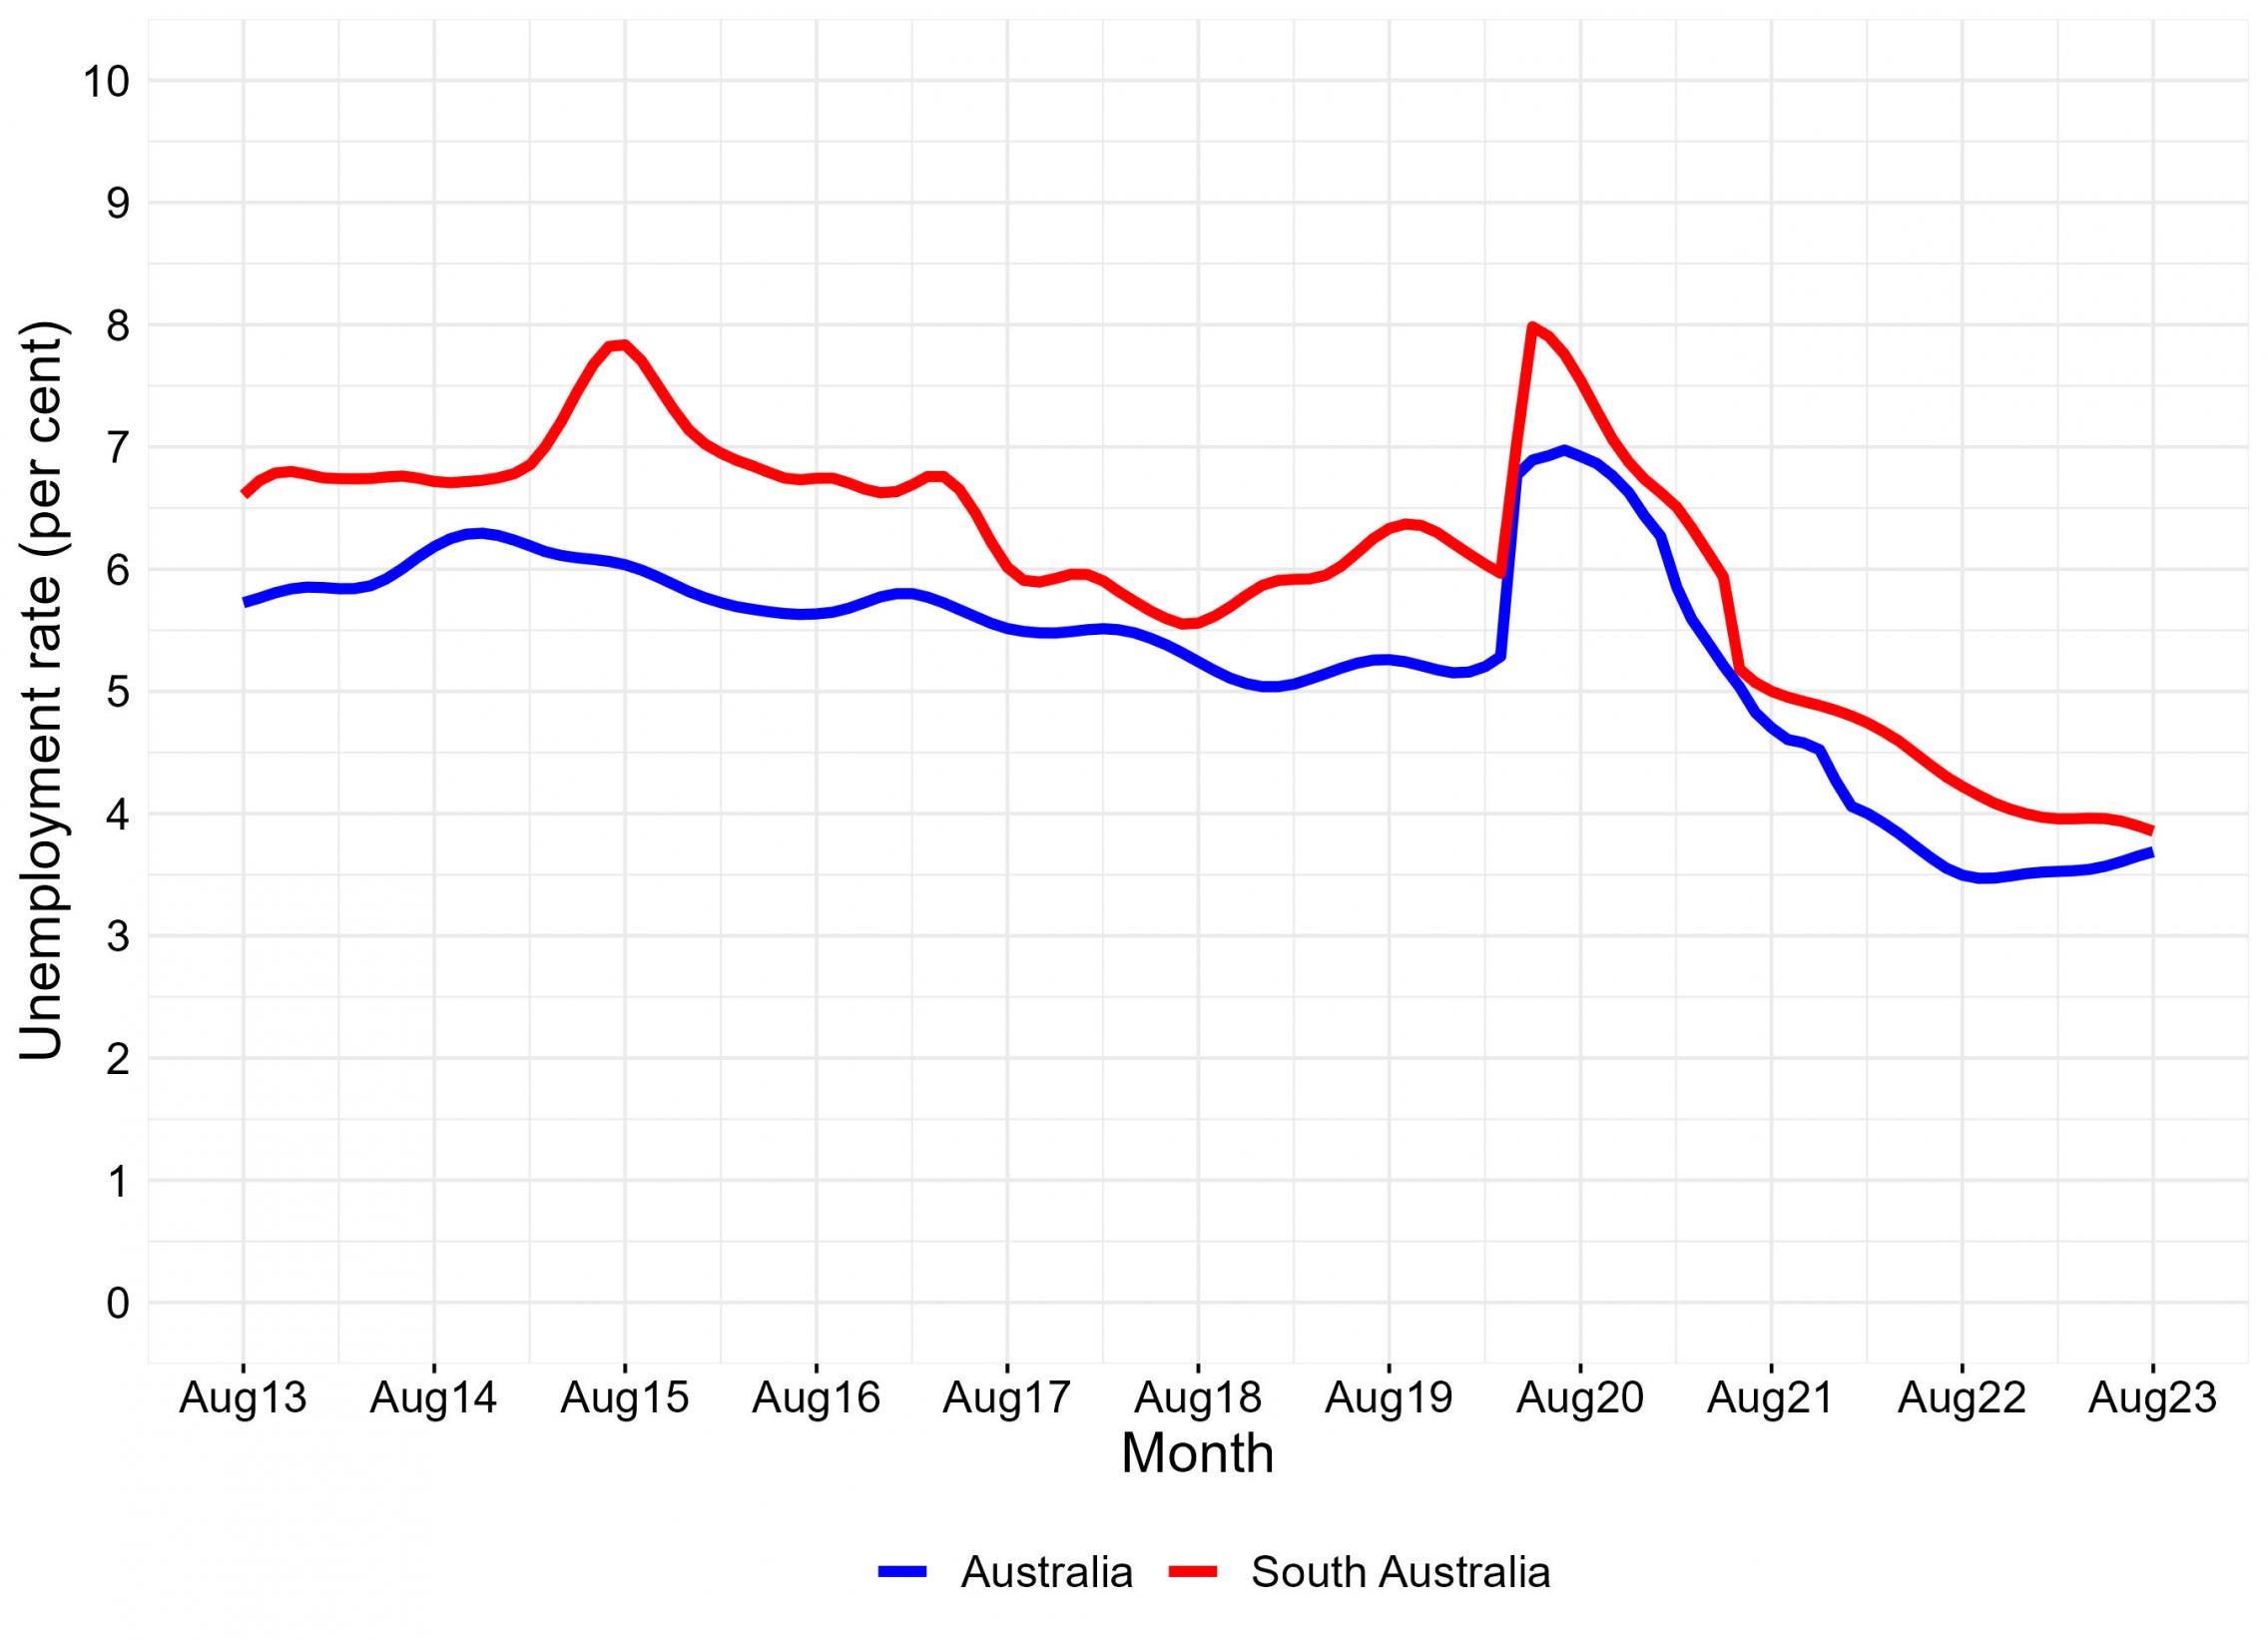 monthly unemployment rate for south australia